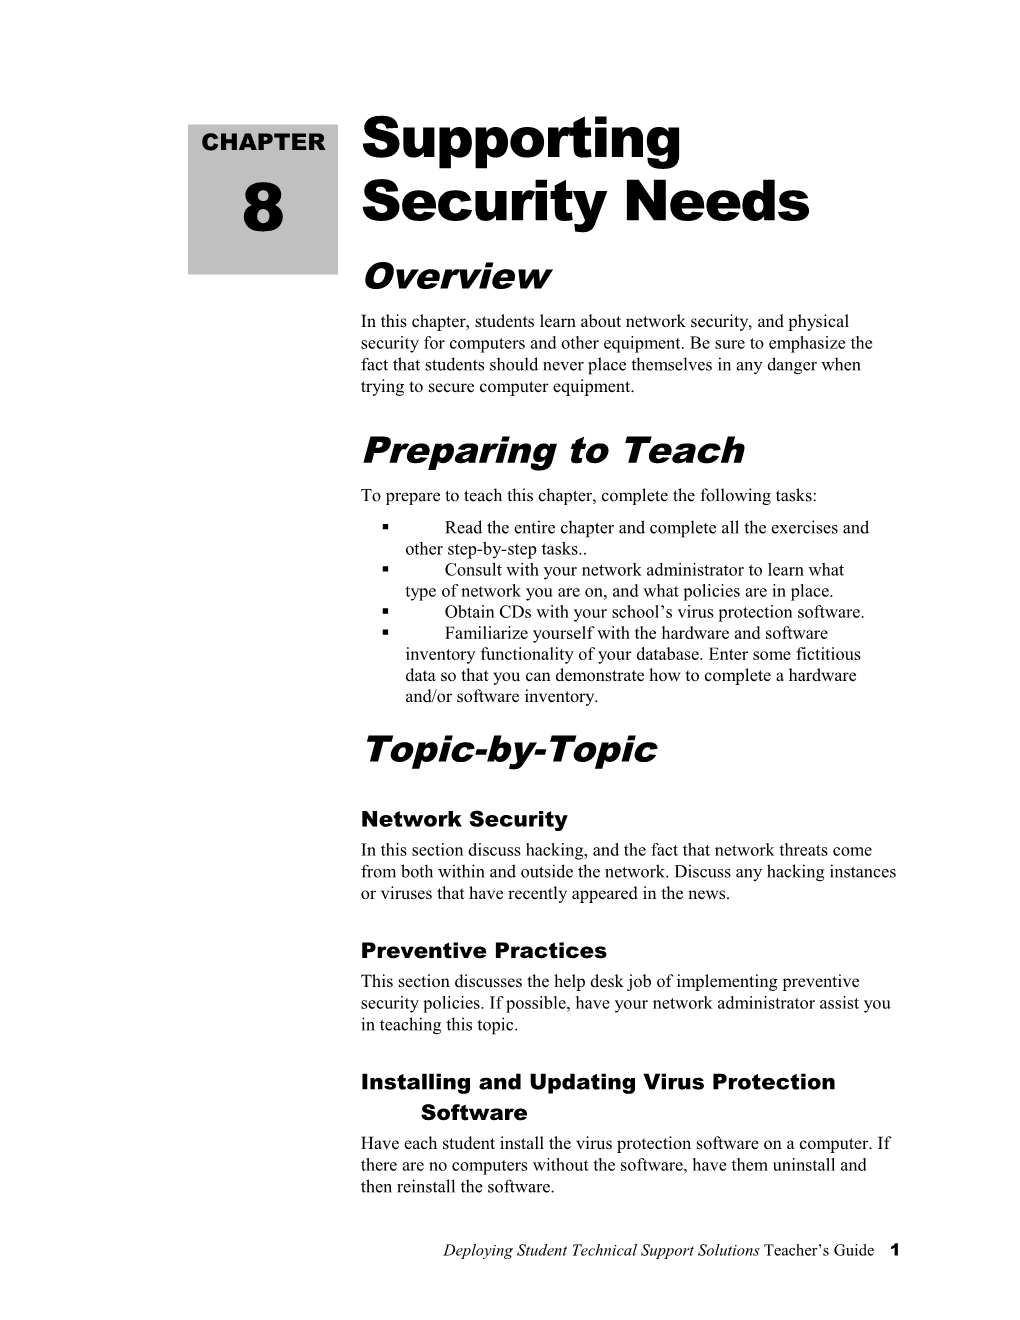 Supporting Security Needs